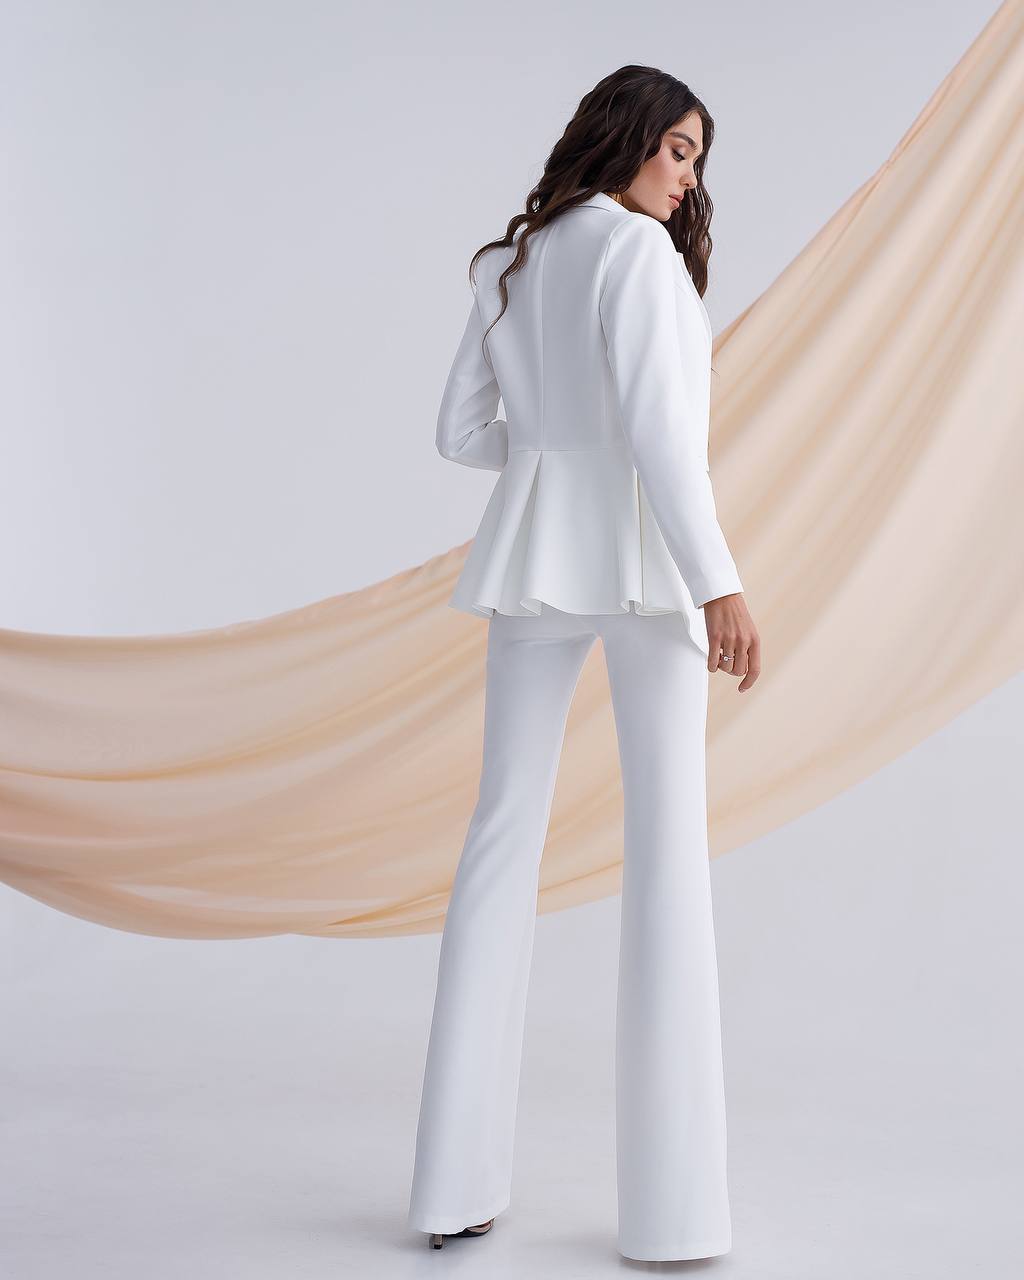 a woman wearing a white suit and pants